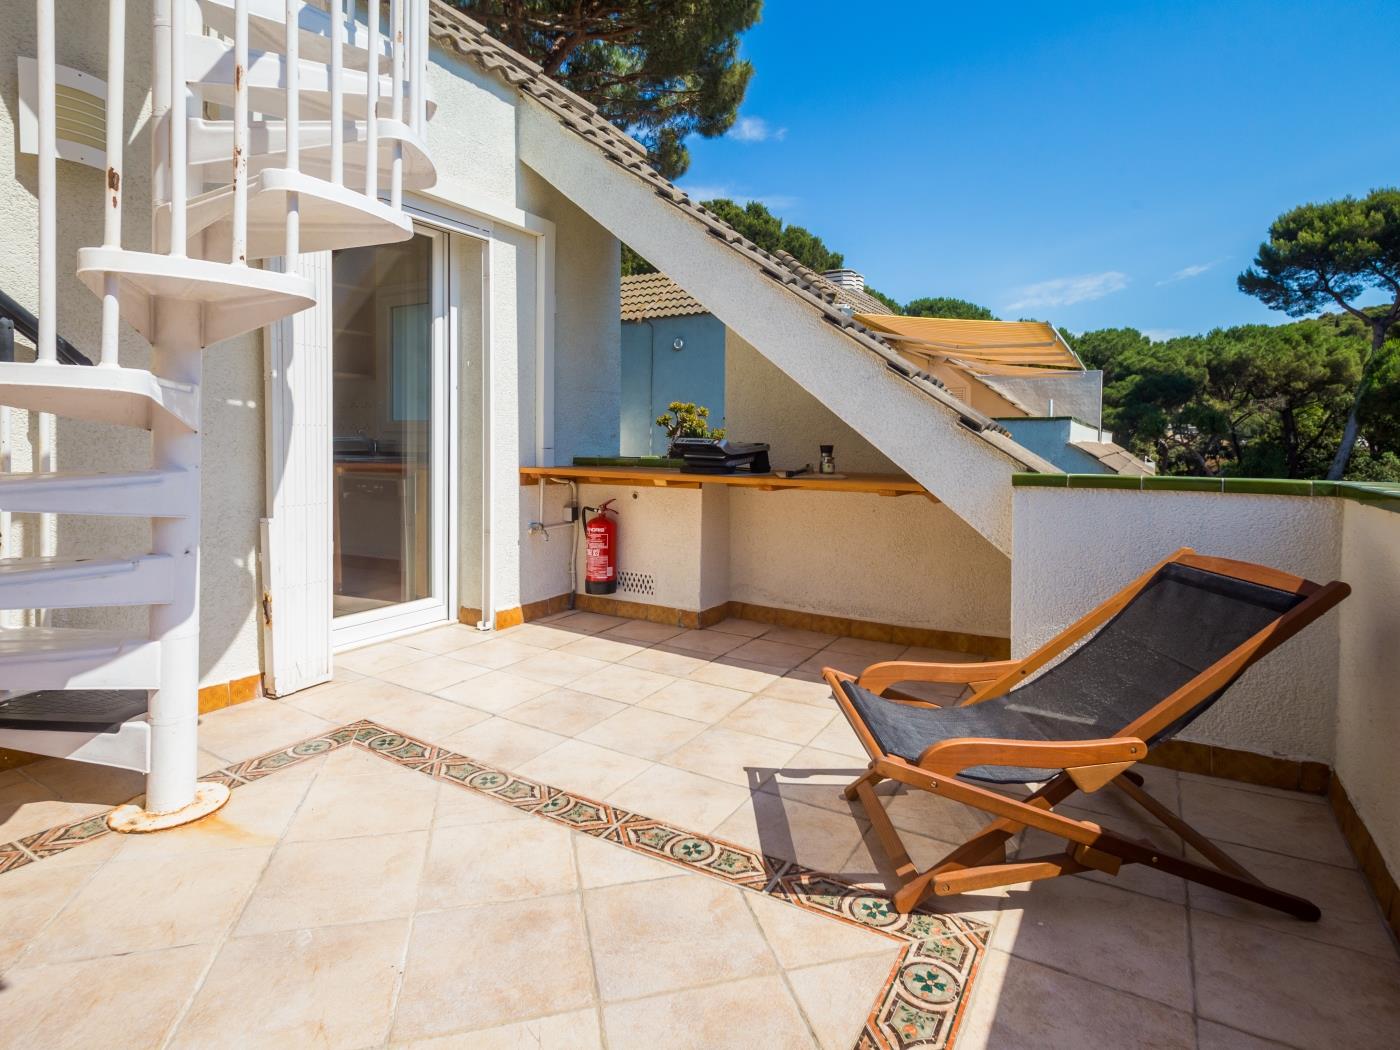 Apto Cala Cristus with sea views just 2 minutes walk from the beach in Calonge